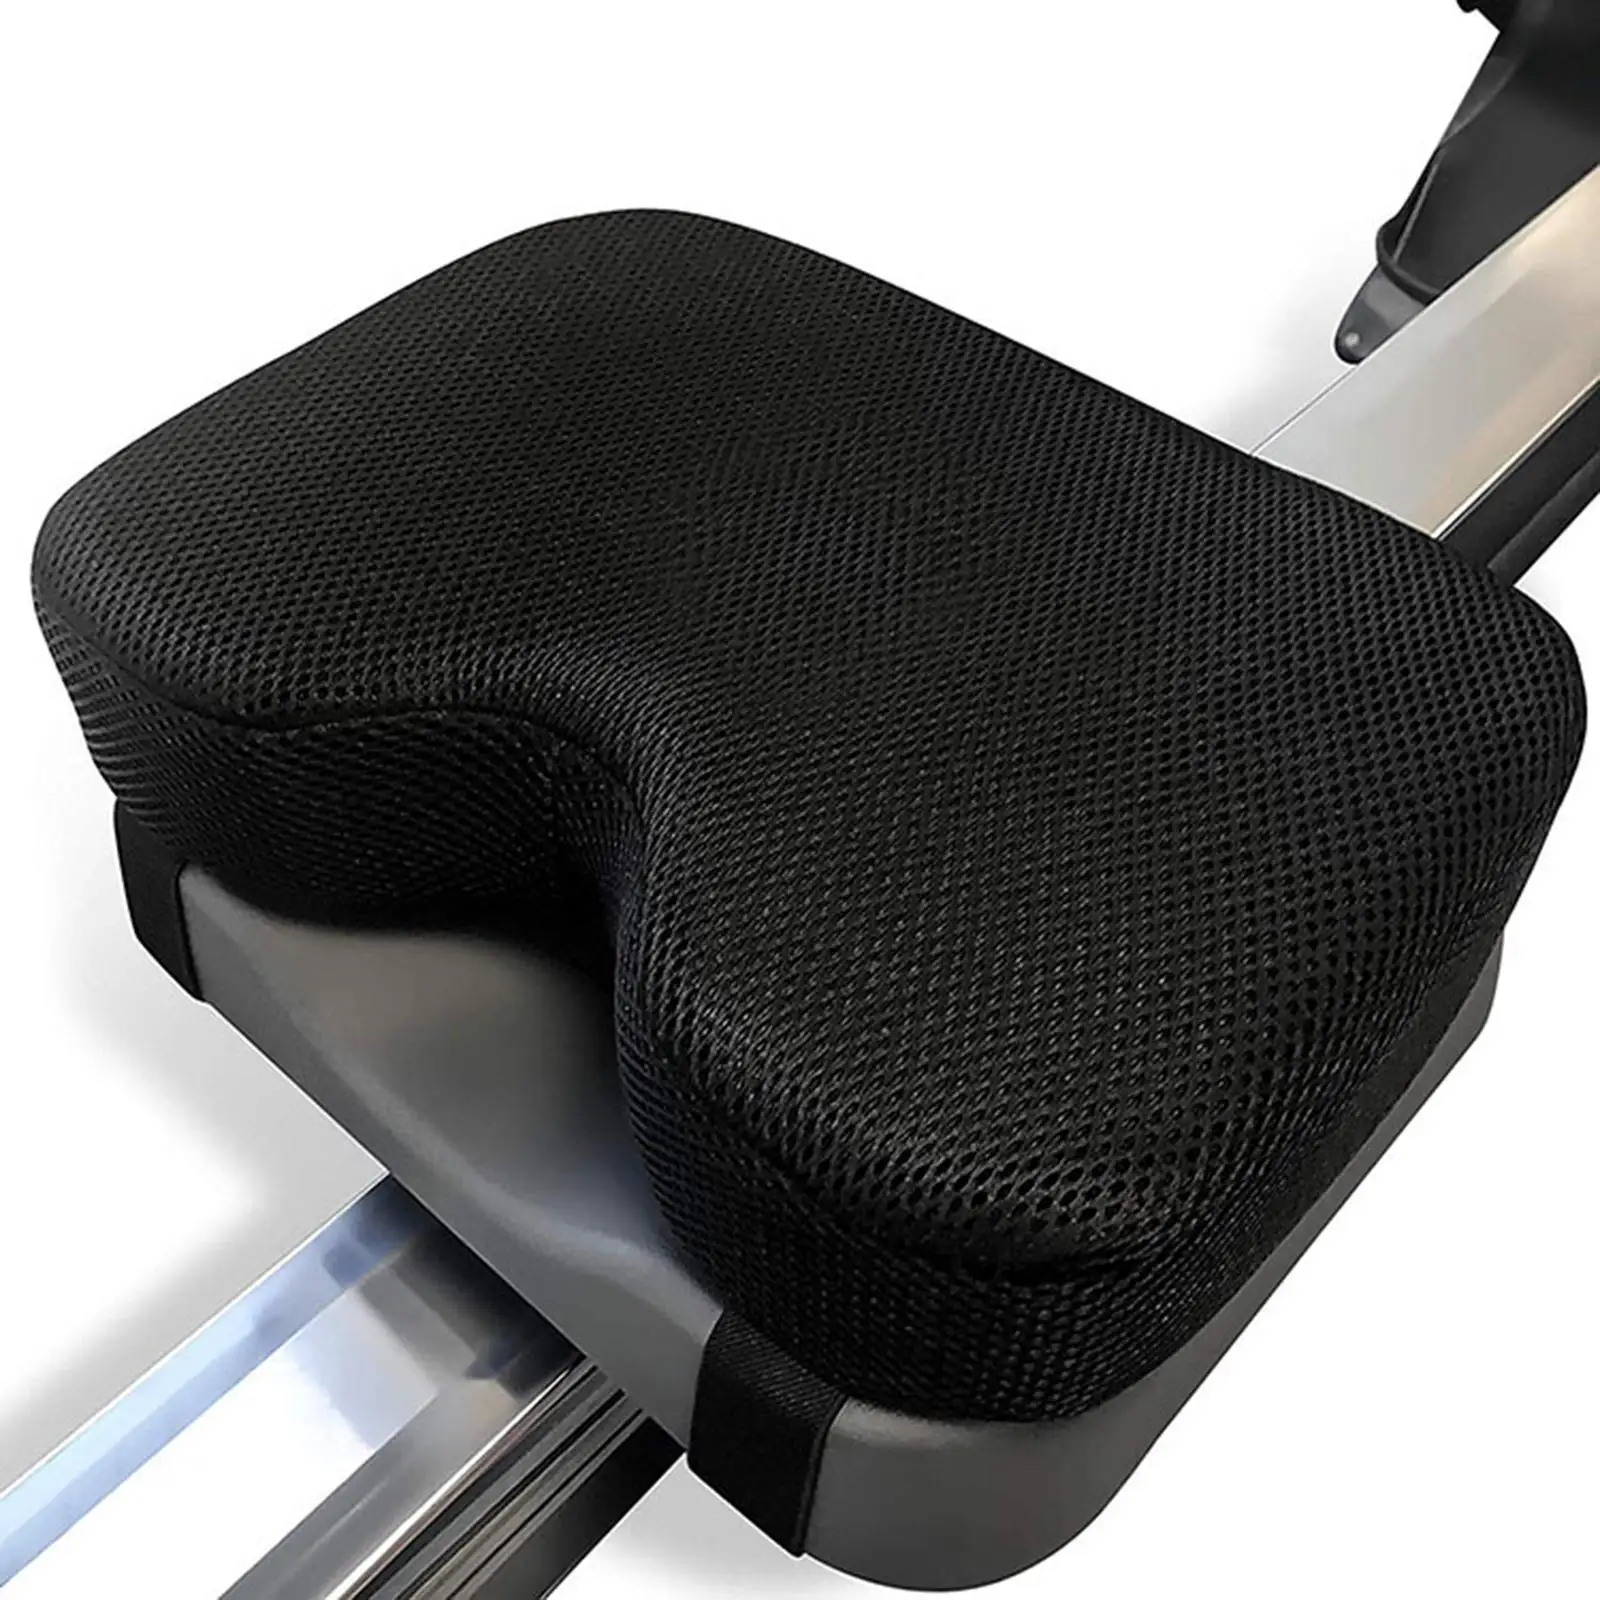 Rowing Machine Seat Cushion Pad Memory Foam Soft Seat Pad for Exercise Adult